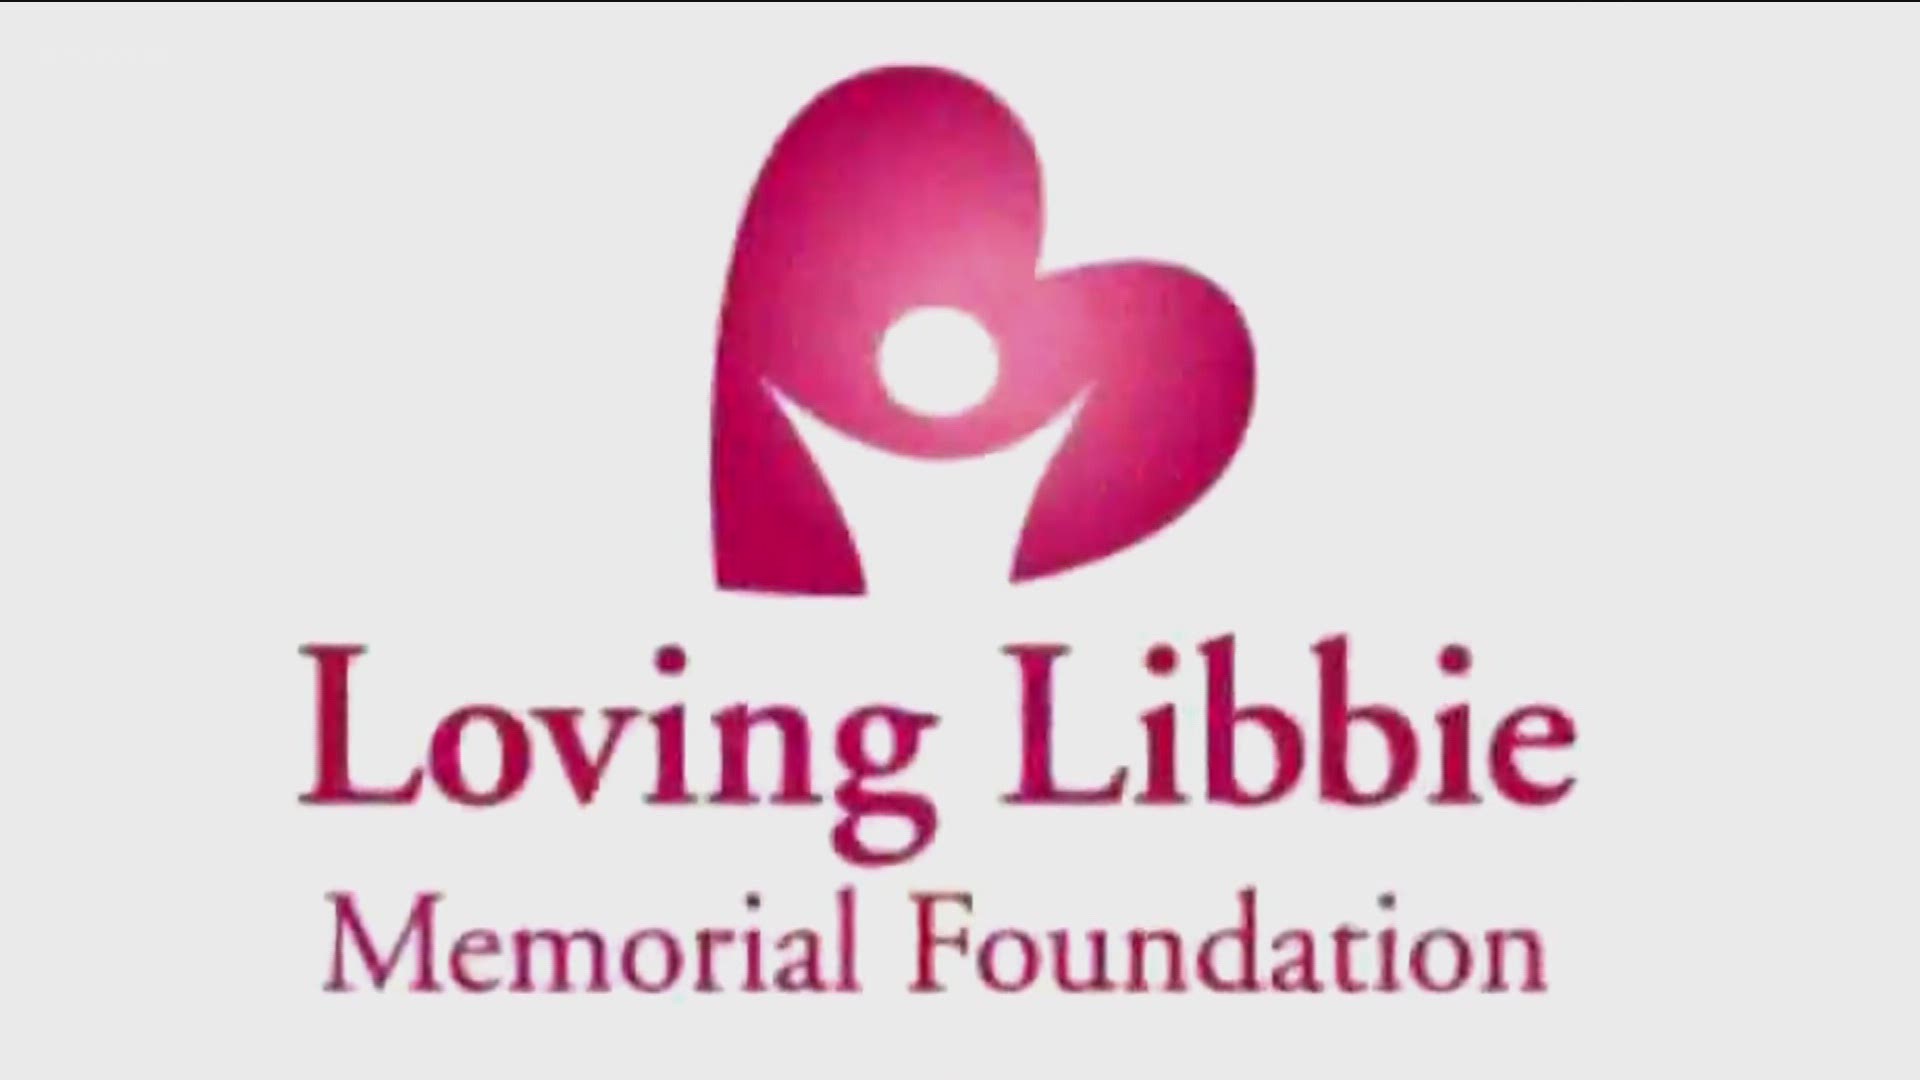 The non-profit has been offering its services since 2006, after the death of Nichols' five-year-old daughter, Libbie.